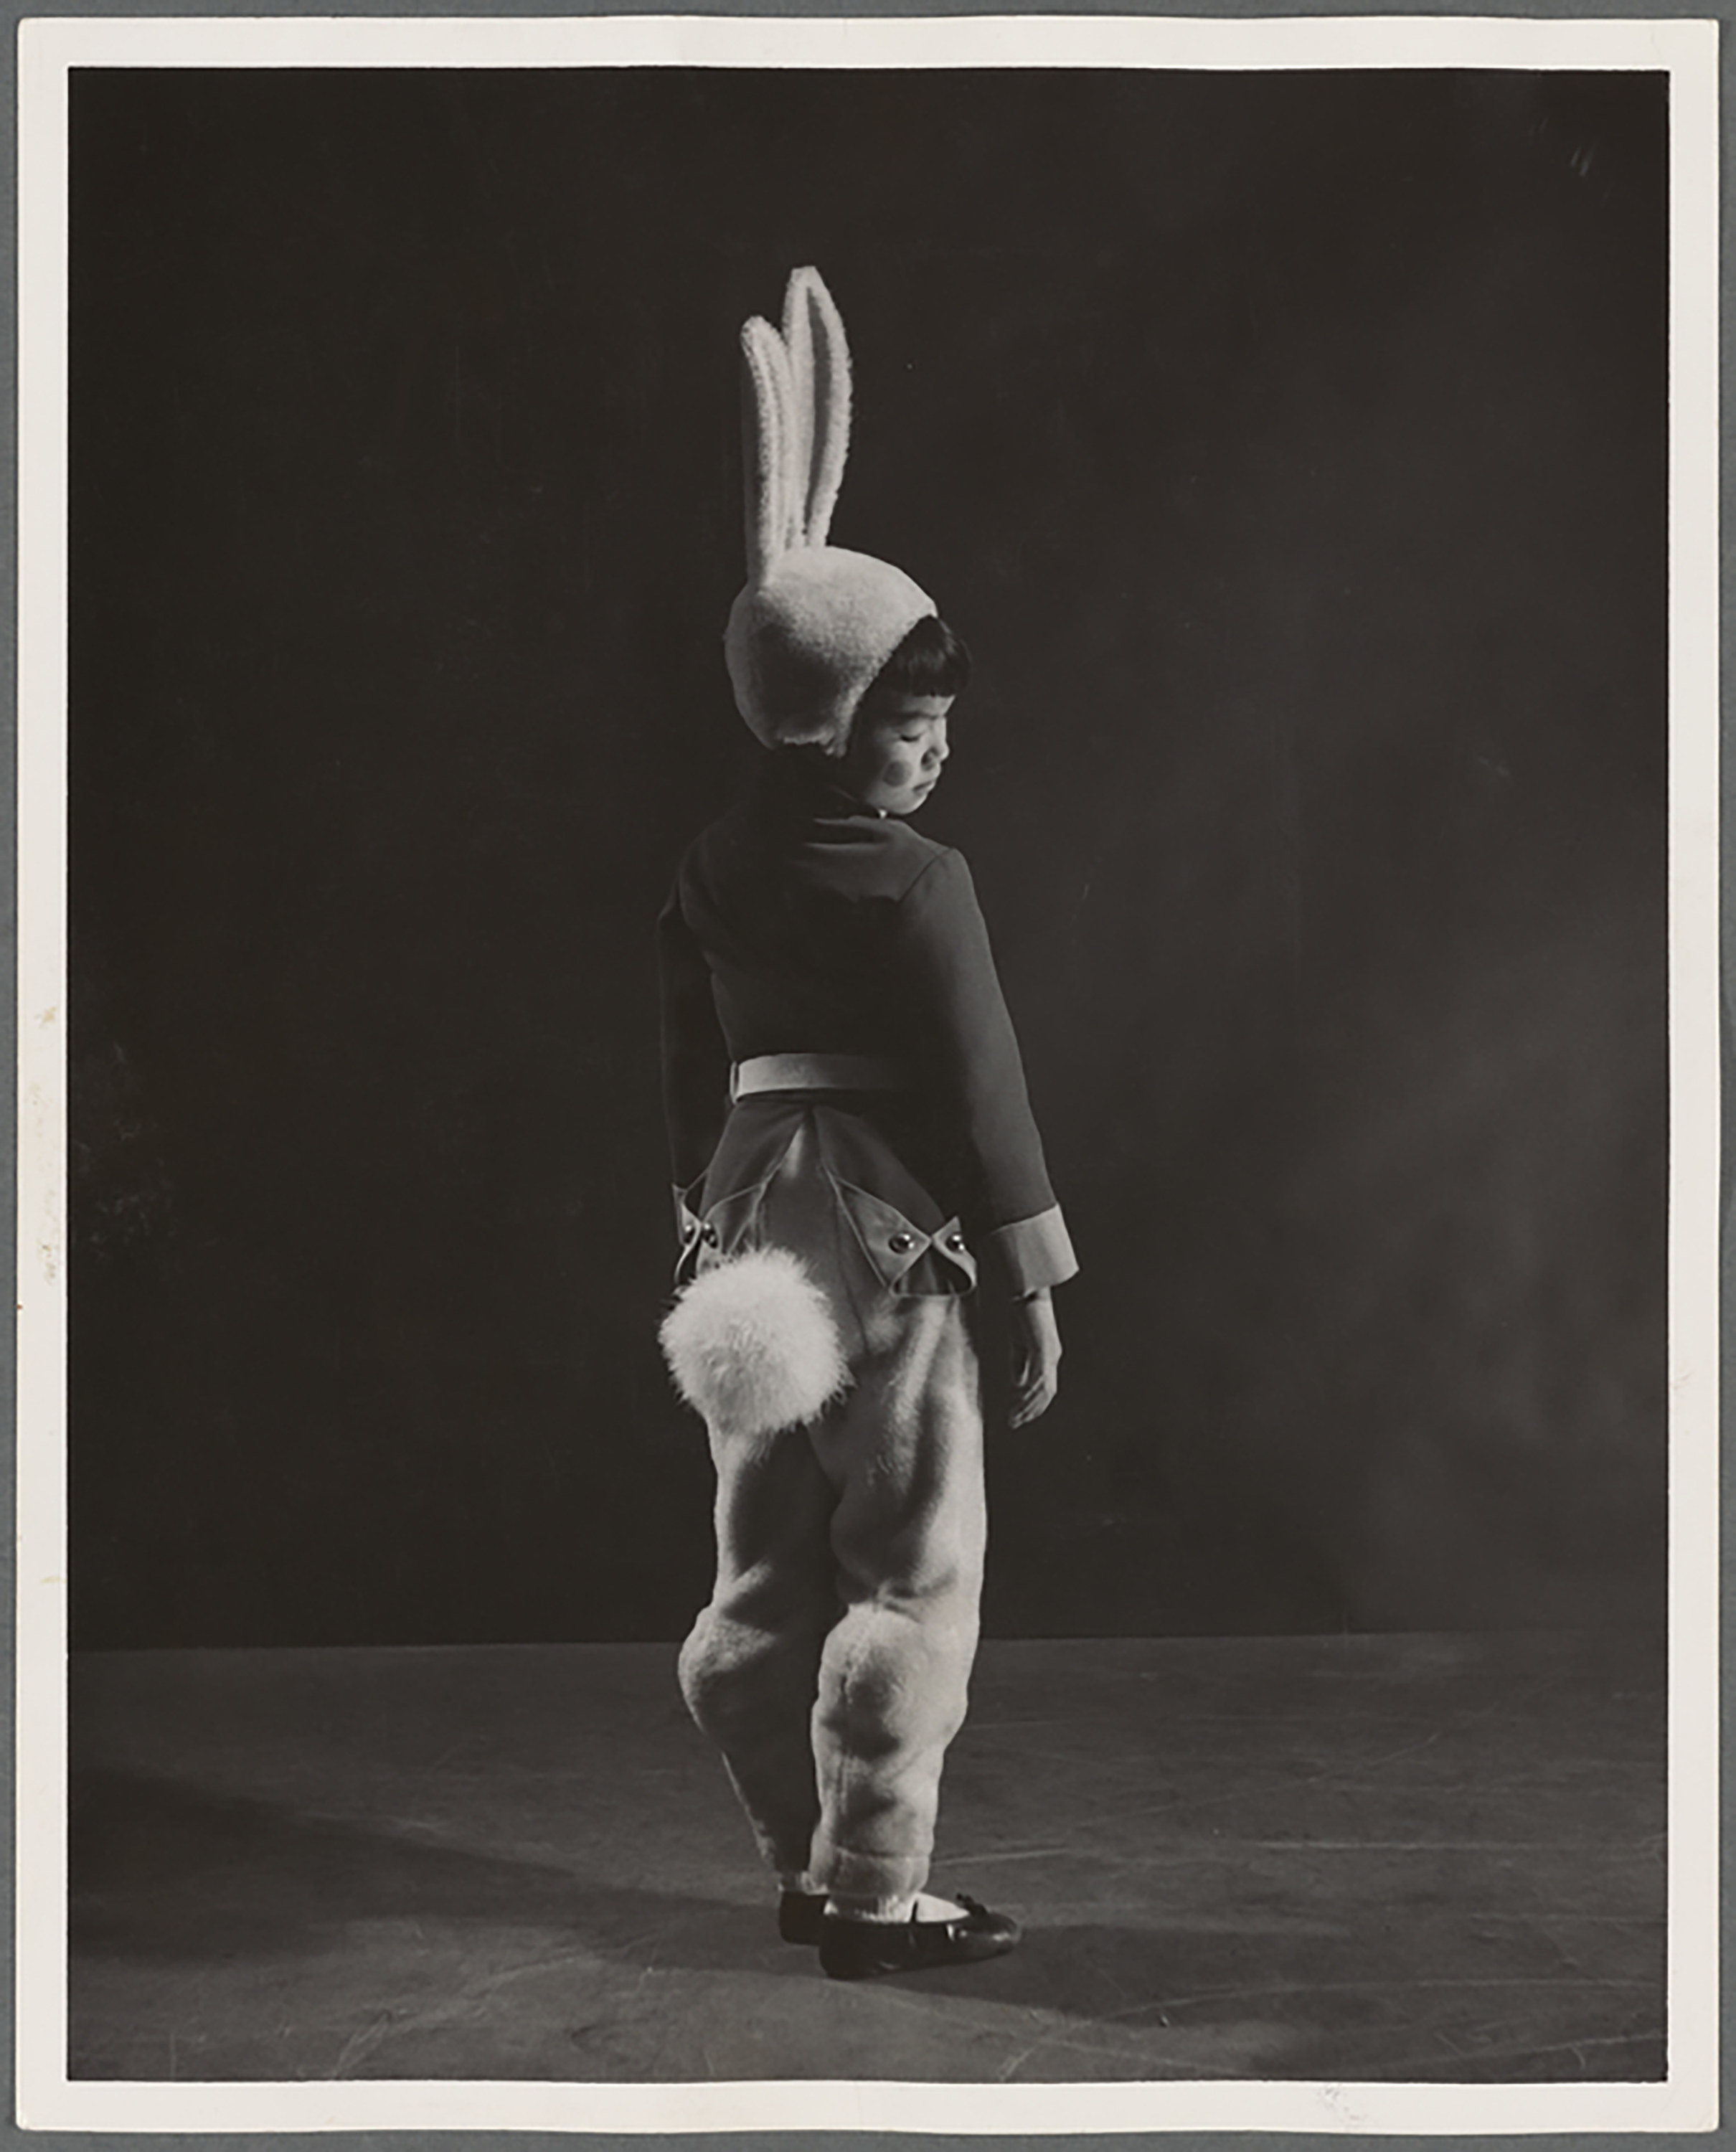 A Black and white image of a small boy in a bunny costume with a fluffy tail